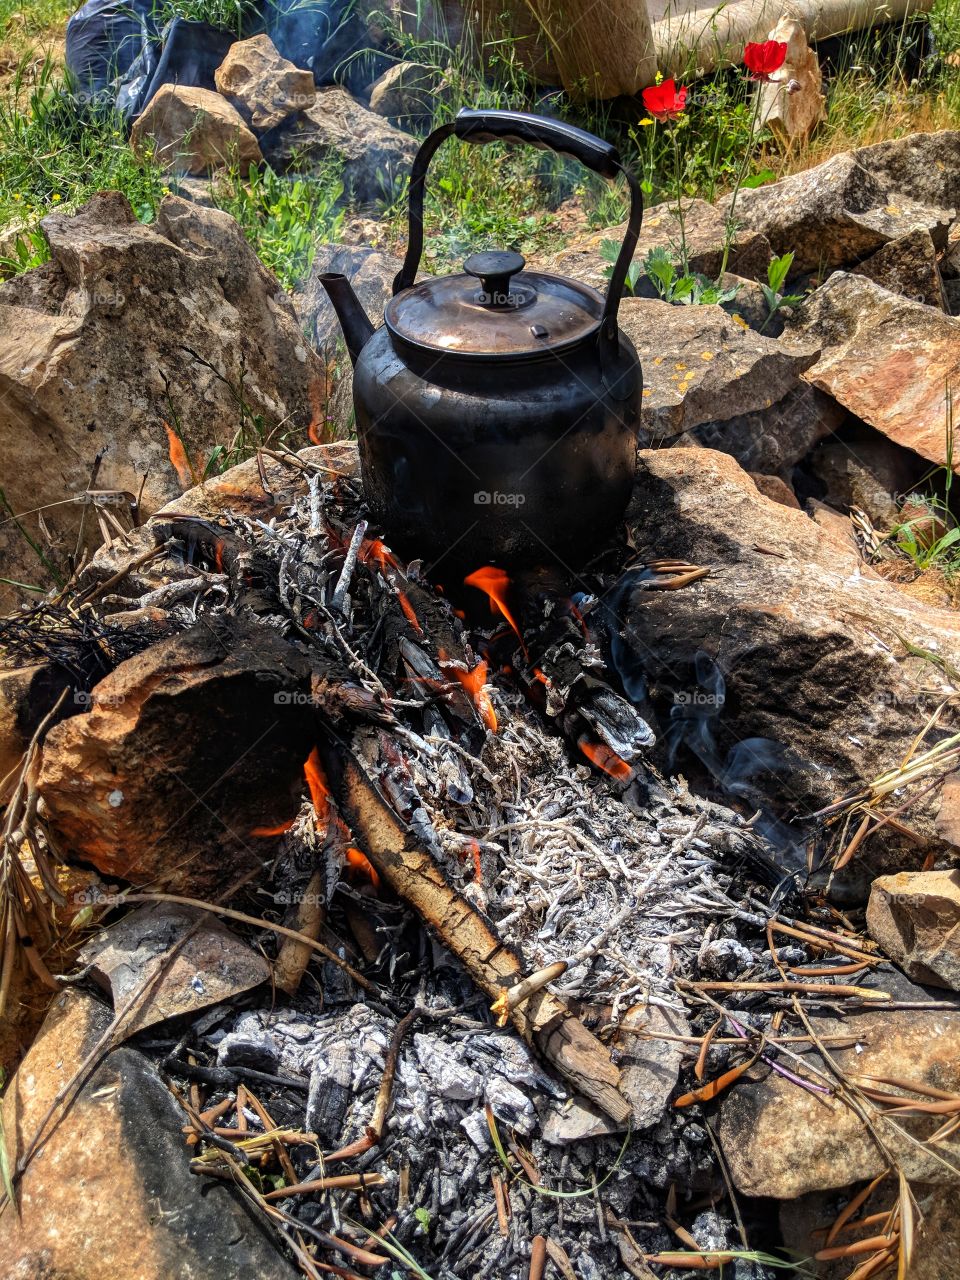 Outside afternoon teatime on a campfire